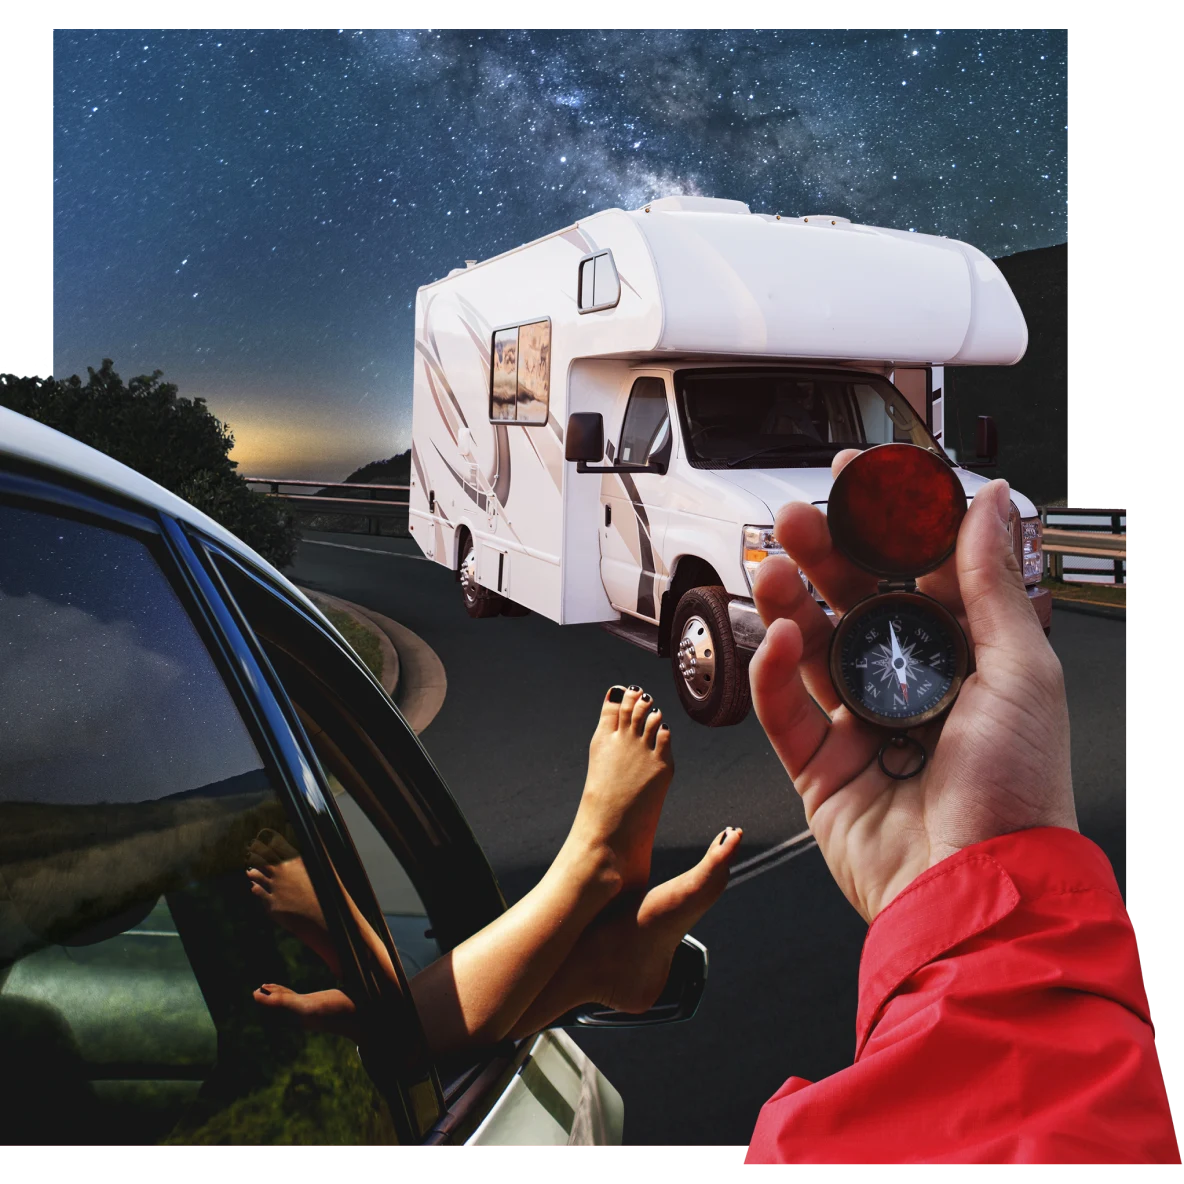 Feet with black toenail varnish lounge out of a car window. A hand with a red sleeve is holding a compass. A white motorhome is parked at a night-time view point, overlooking a valley at dusk and a star-filled sky.